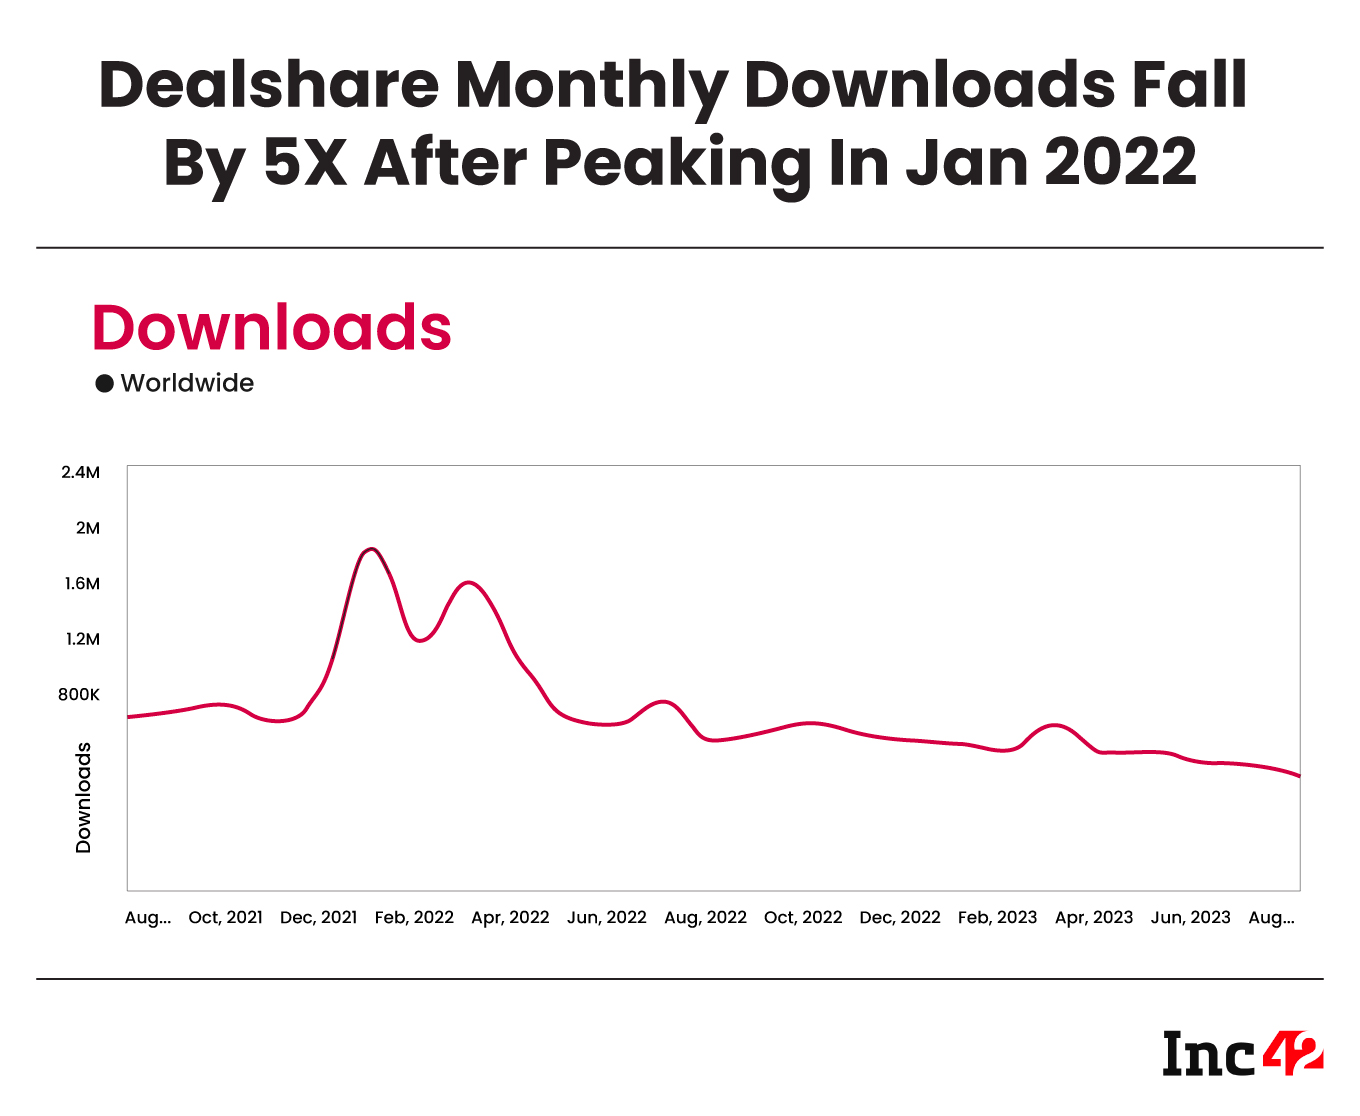 Dealshare downloads peaked in January 2022 after the startup raised funds